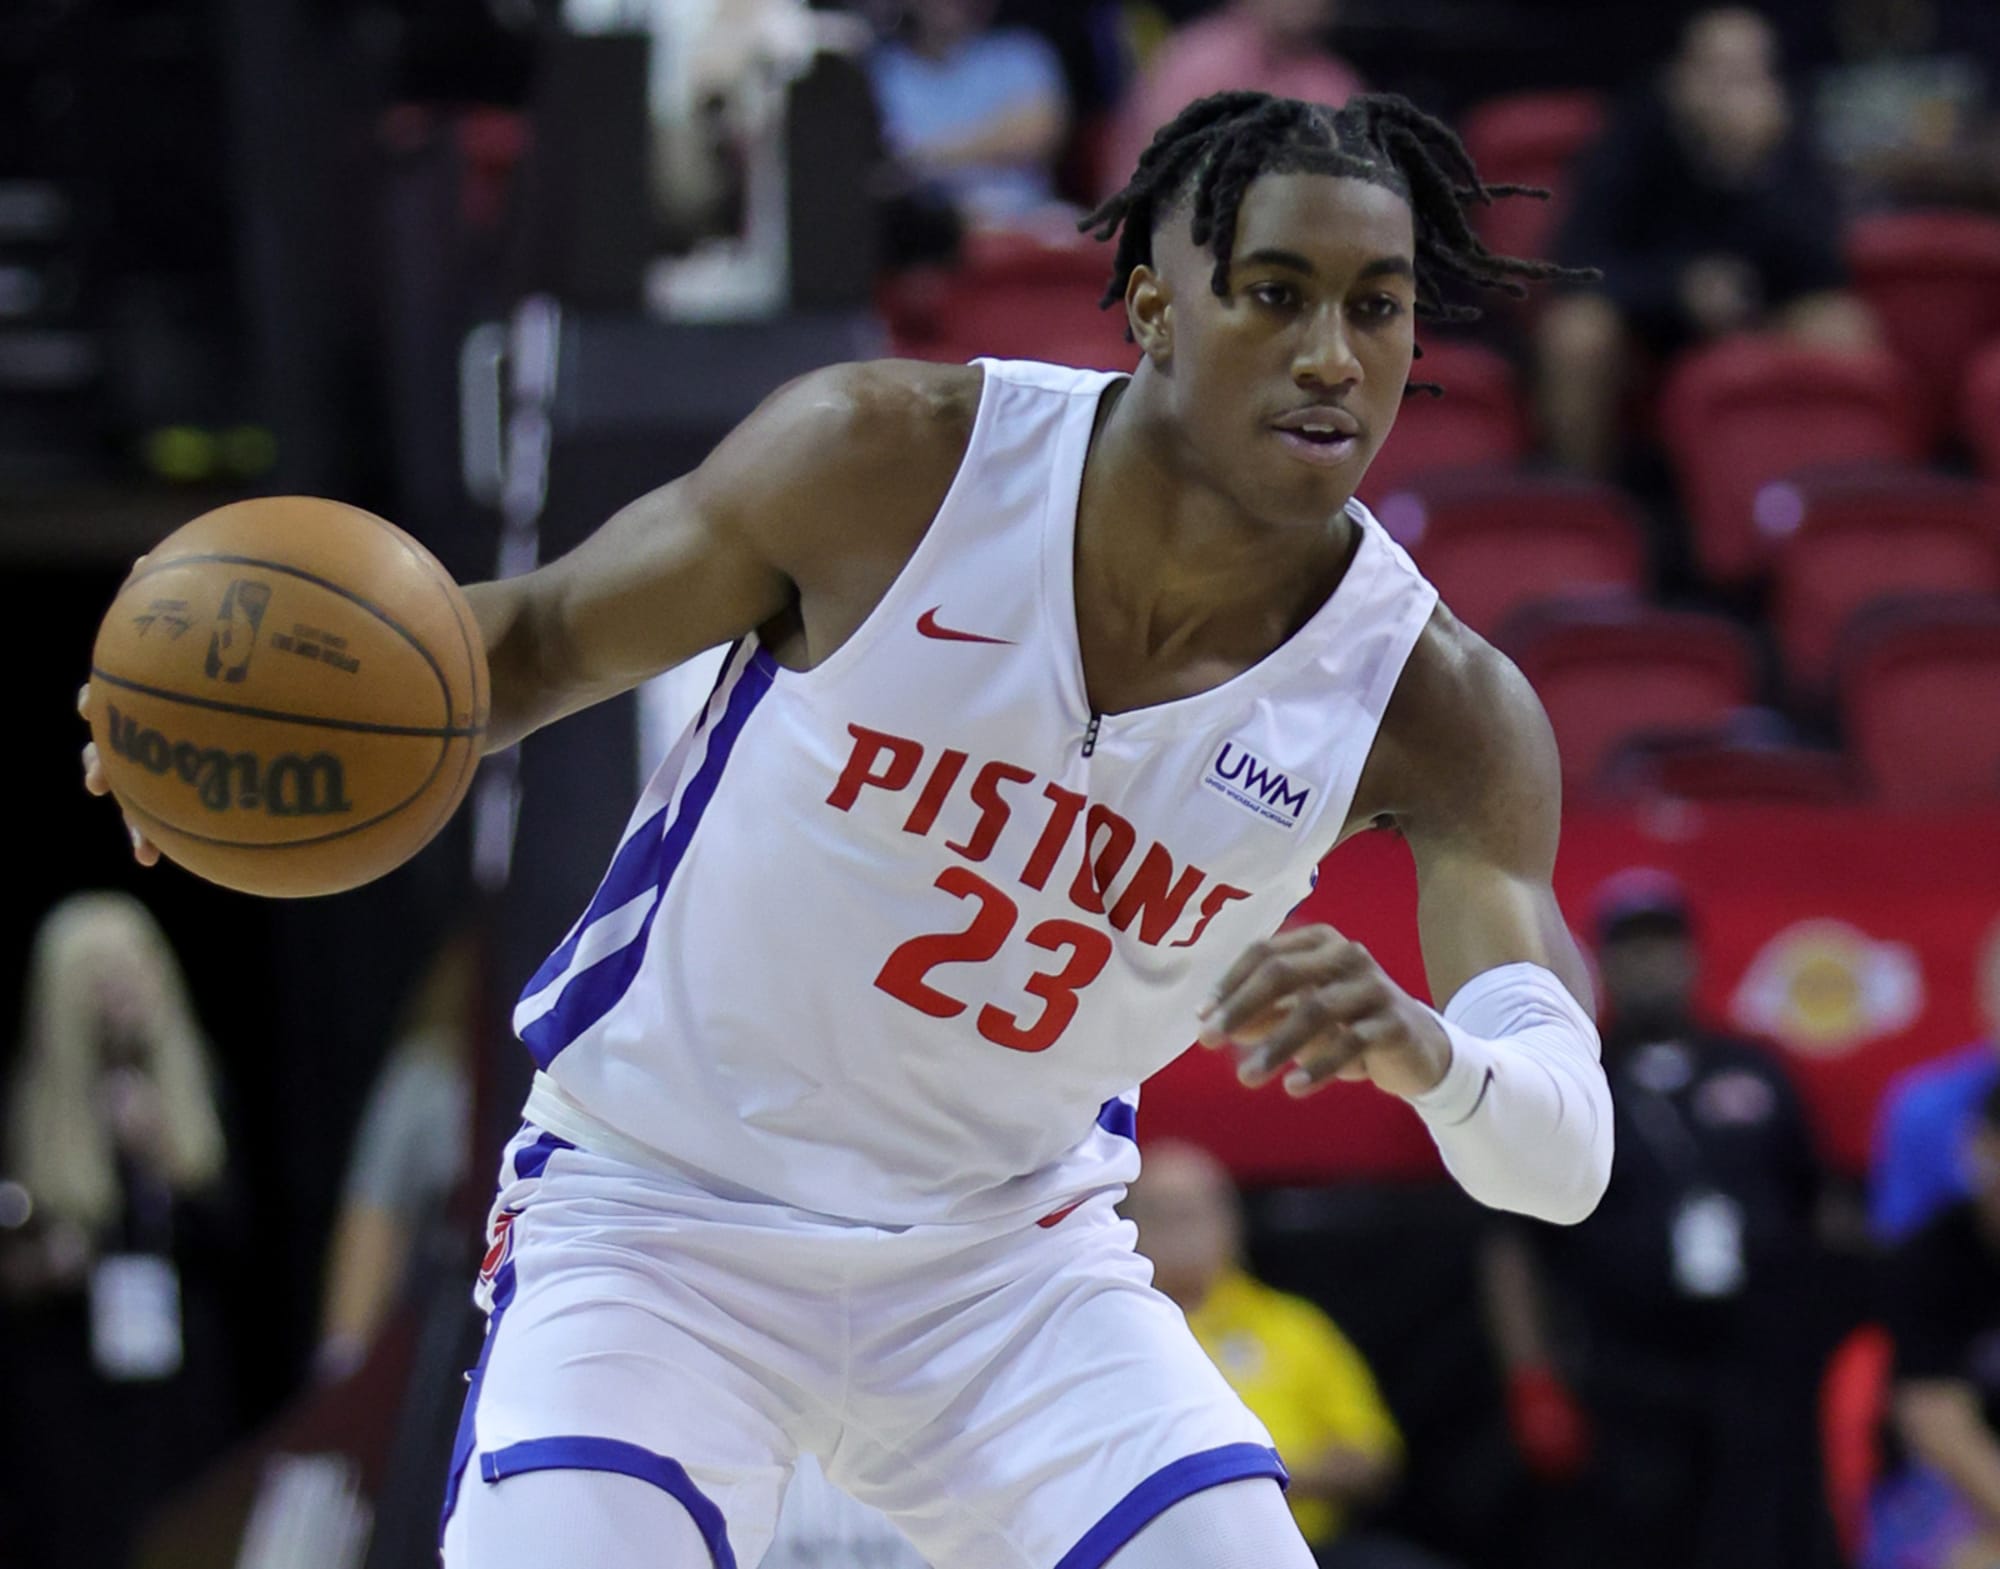 Detroit Pistons Why Jaden Ivey wears the number 23